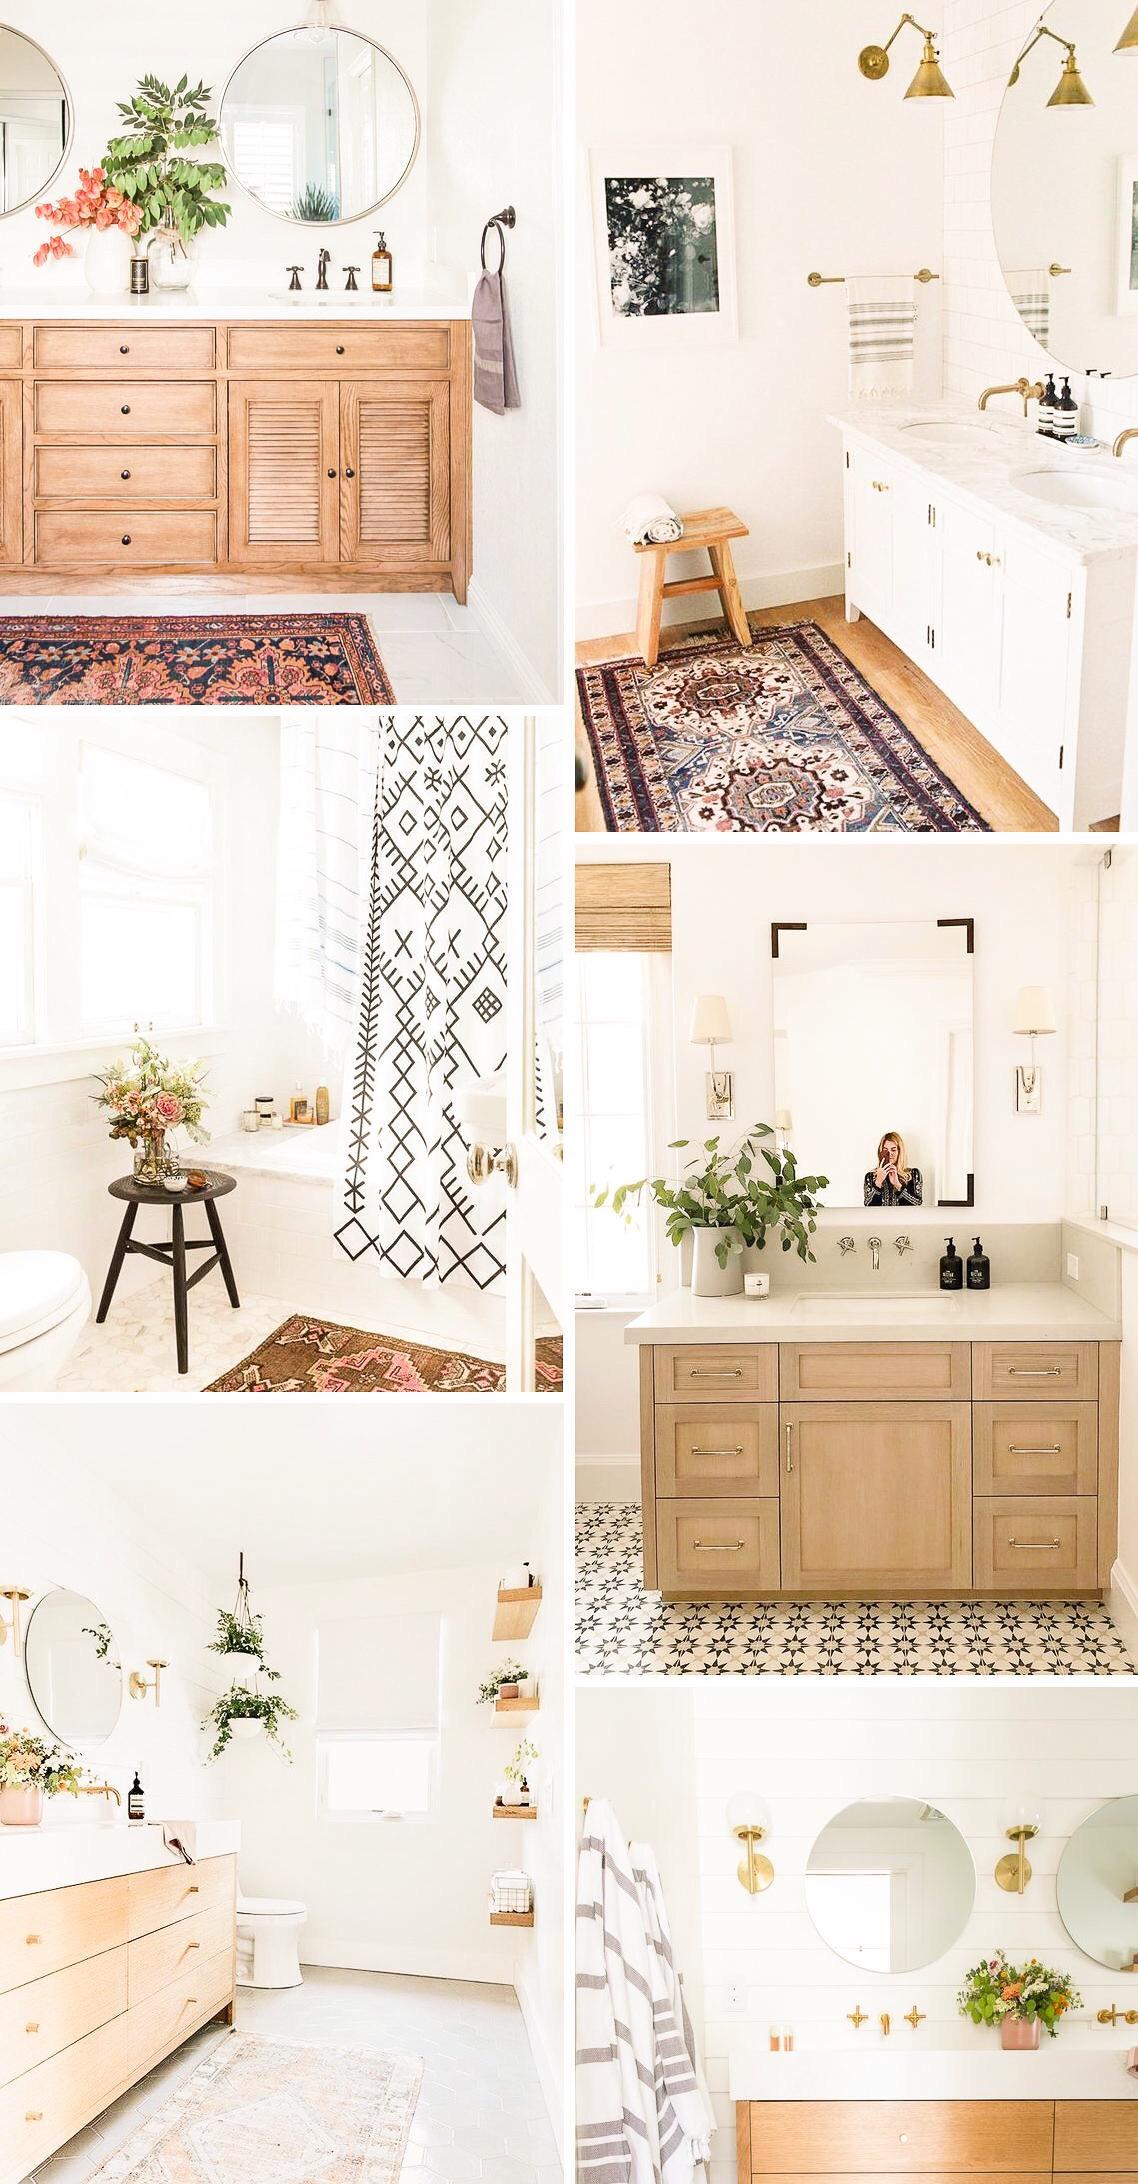 Our First House: Bathroom Inspiration